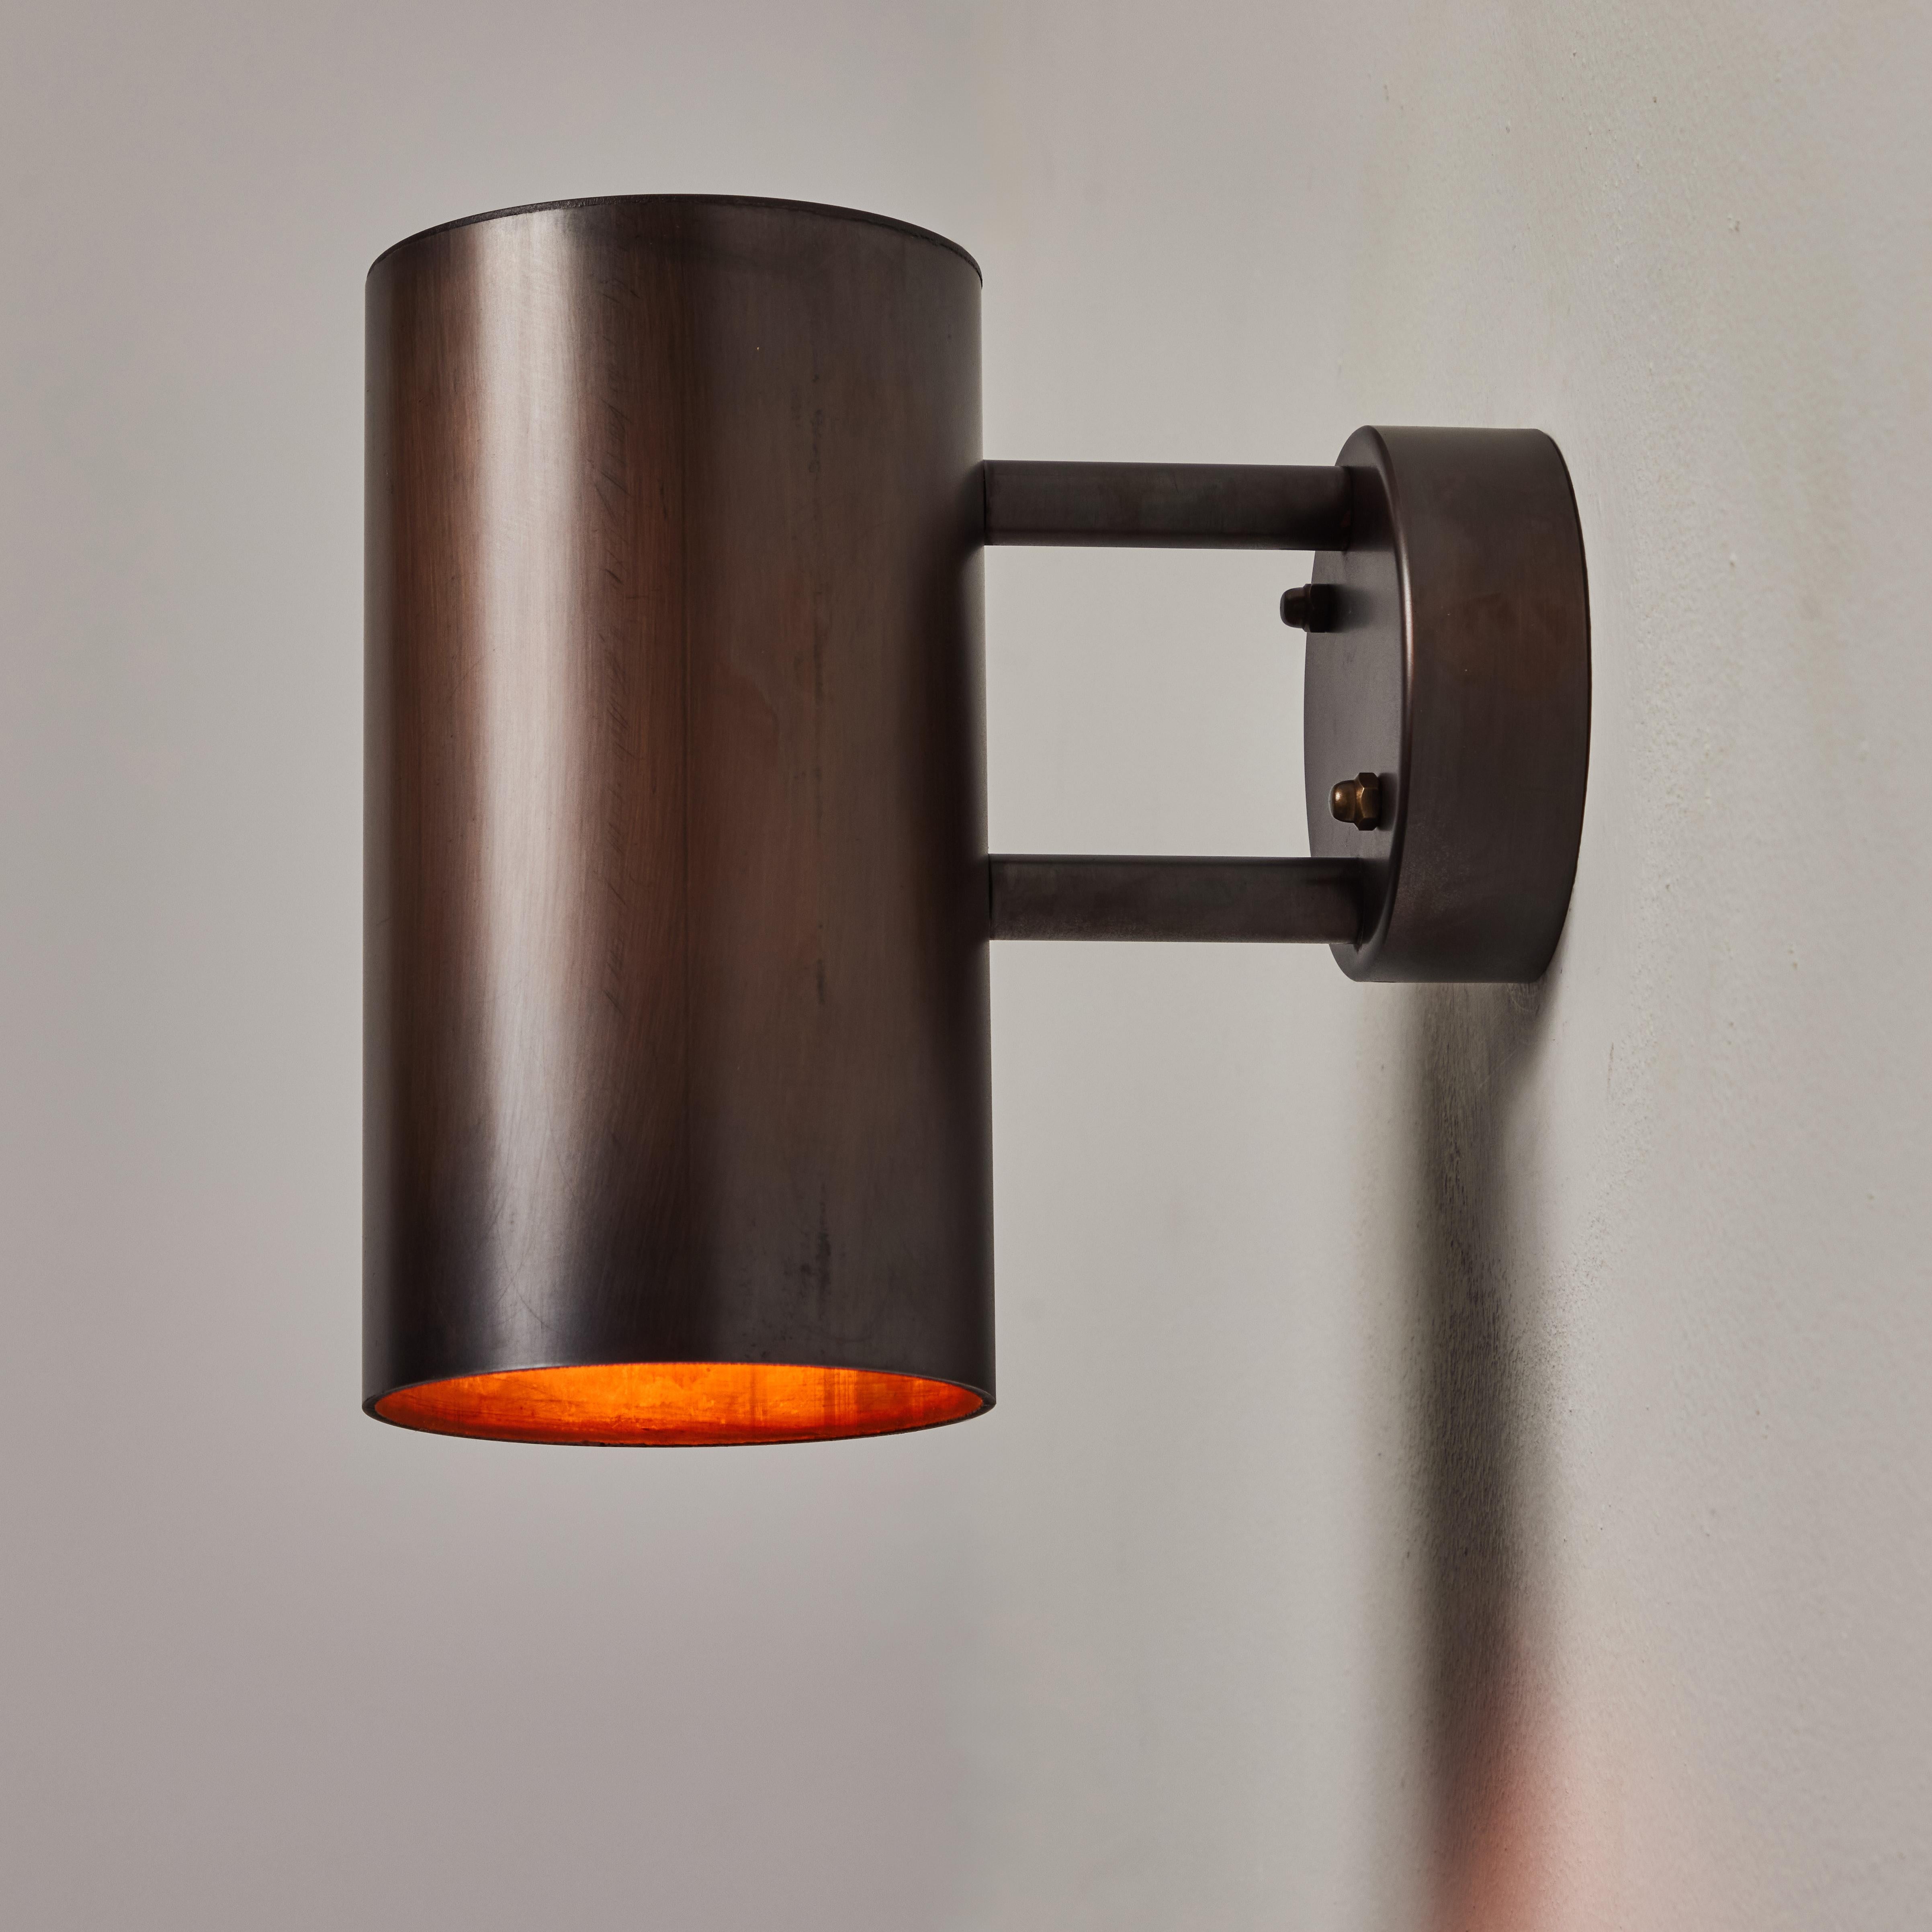 Hans-Agne Jakobsson C627/110 'Rulle' brown patinated outdoor sconce. An exclusive made for U.S. and UL listed authorized re-edition of the classic Swedish design executed in richly patinated metal that will continue to develop a lovely patina over